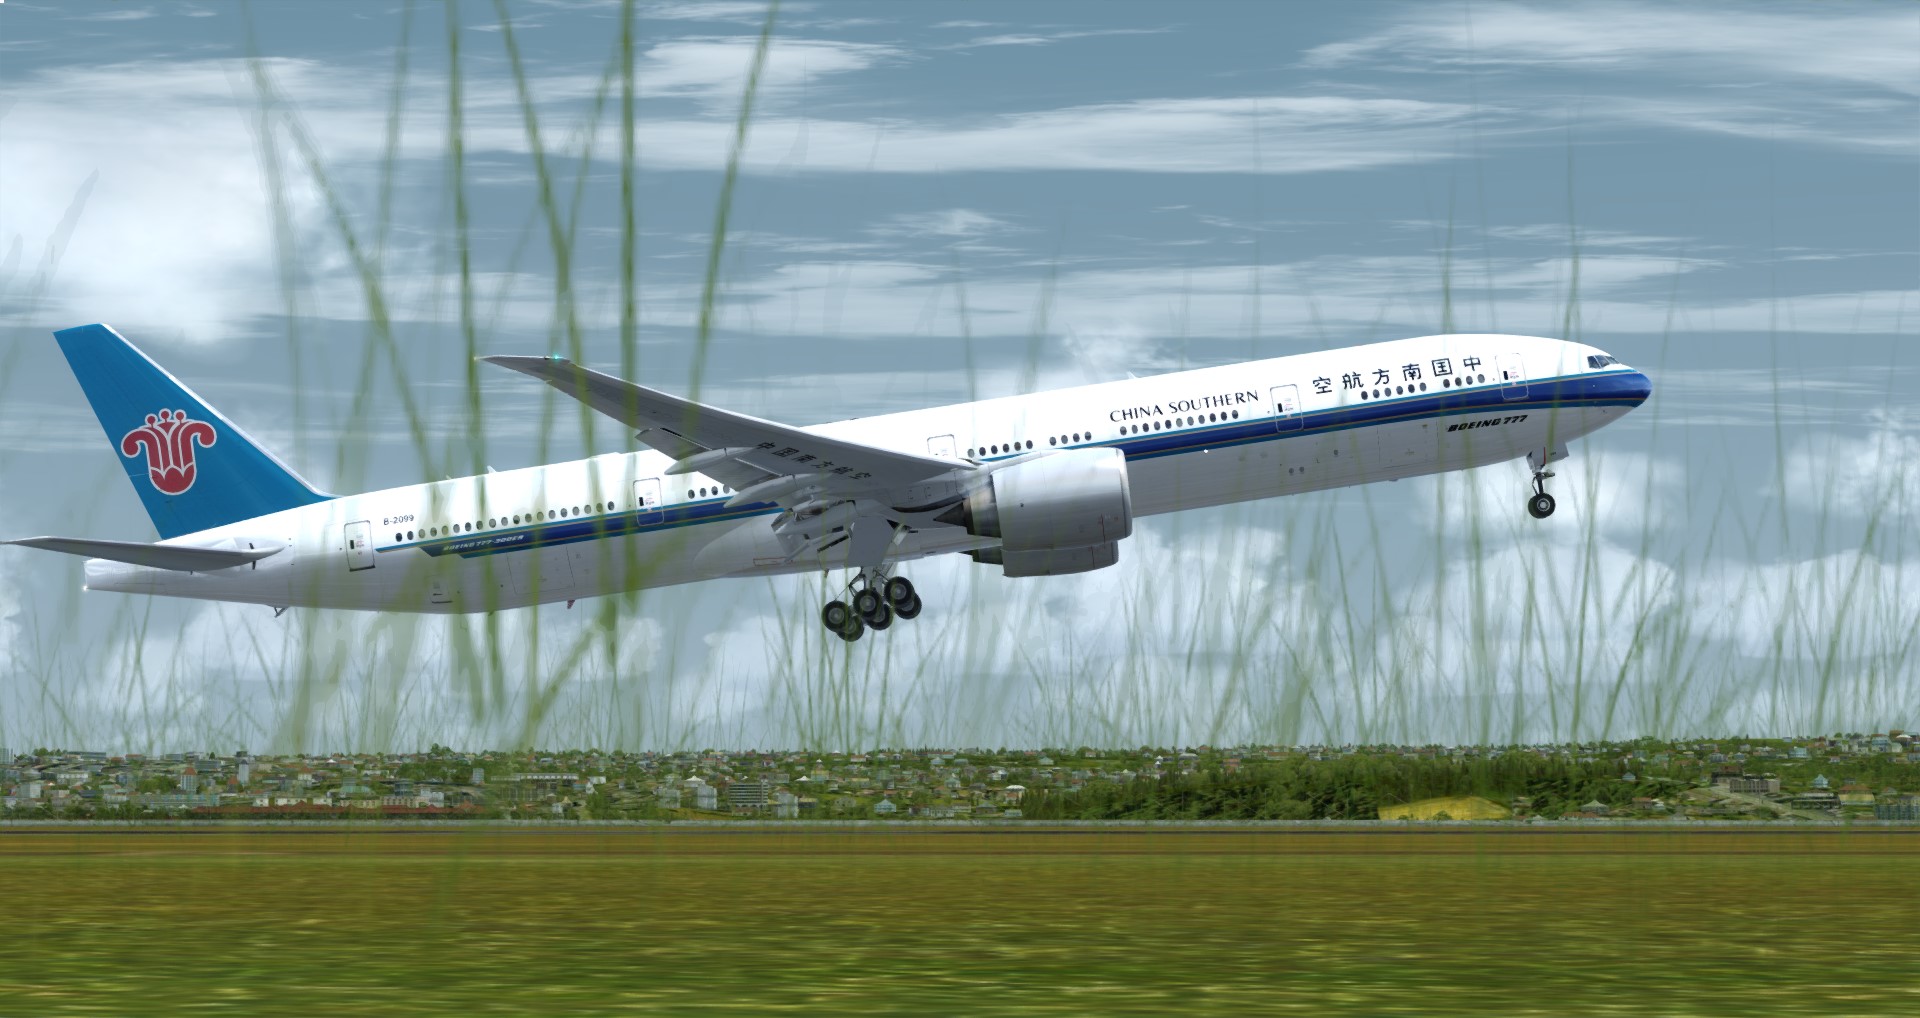 P3D V4 77W China Southern Airlines WADD-ZGGG 营救同胞-7193 